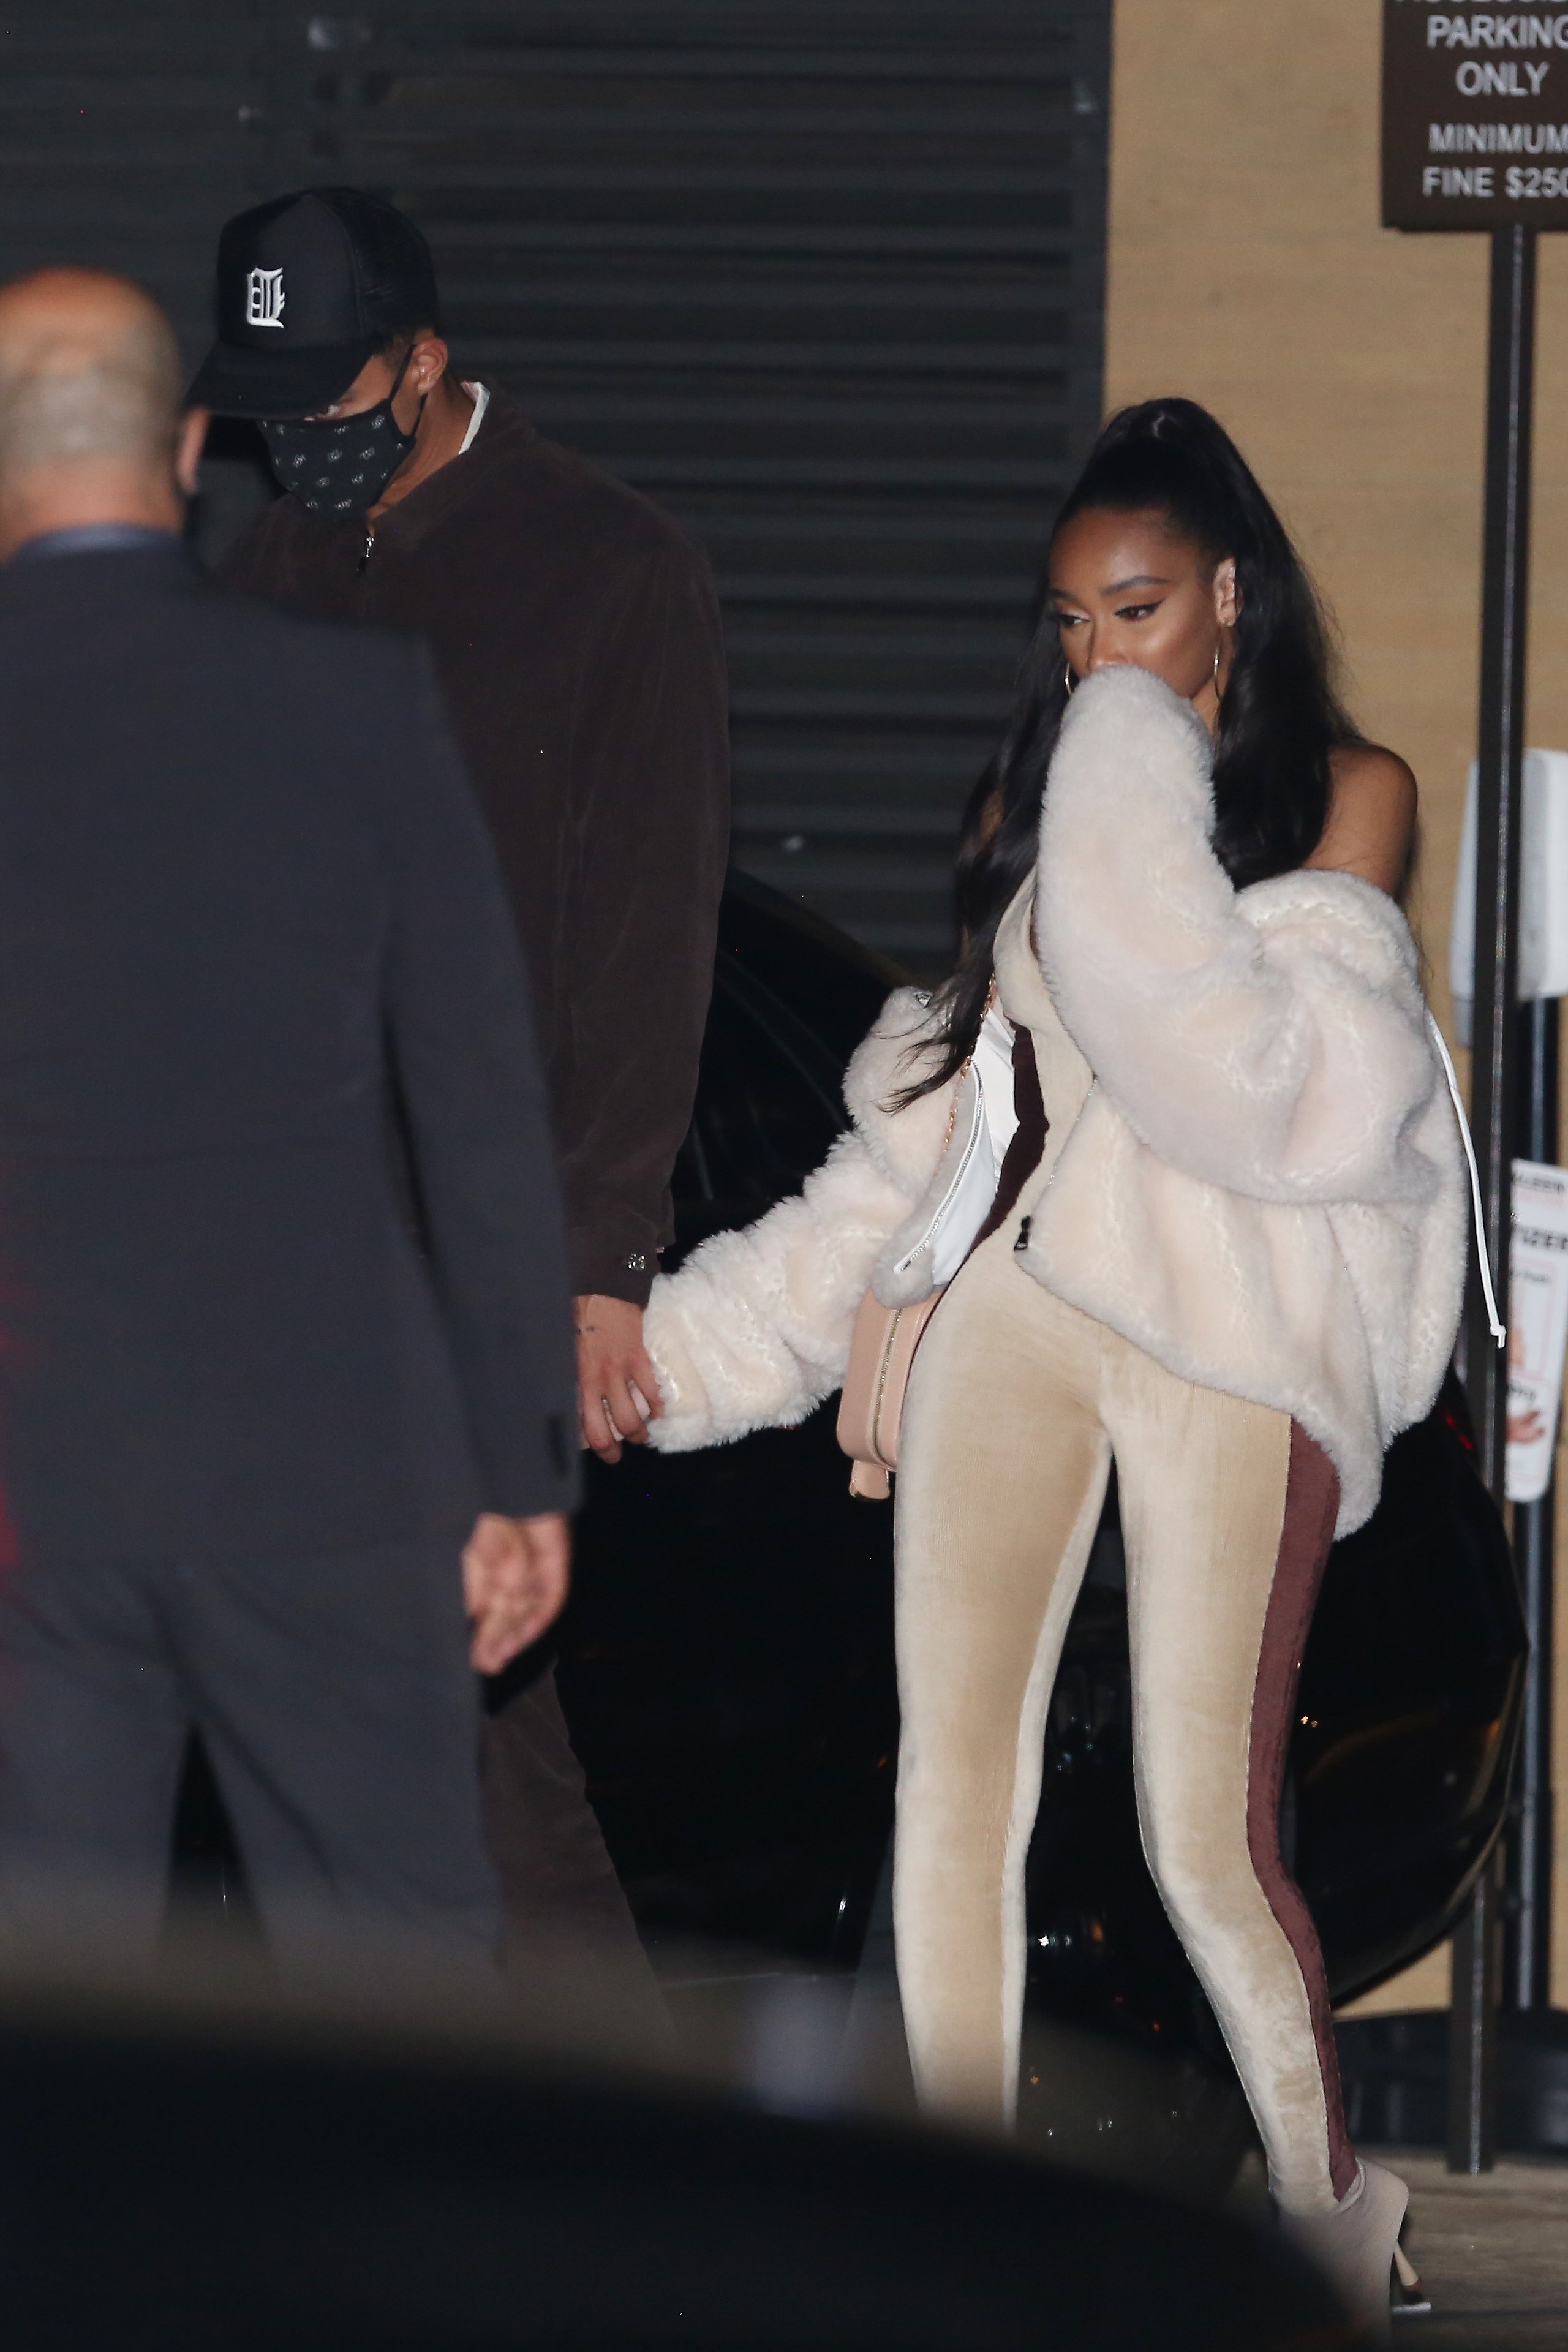 Kyle Kuzma and Winnie Harlow out to dinner at Nobu on October 14, 2020 in Malibu, California. | Source: Getty Images